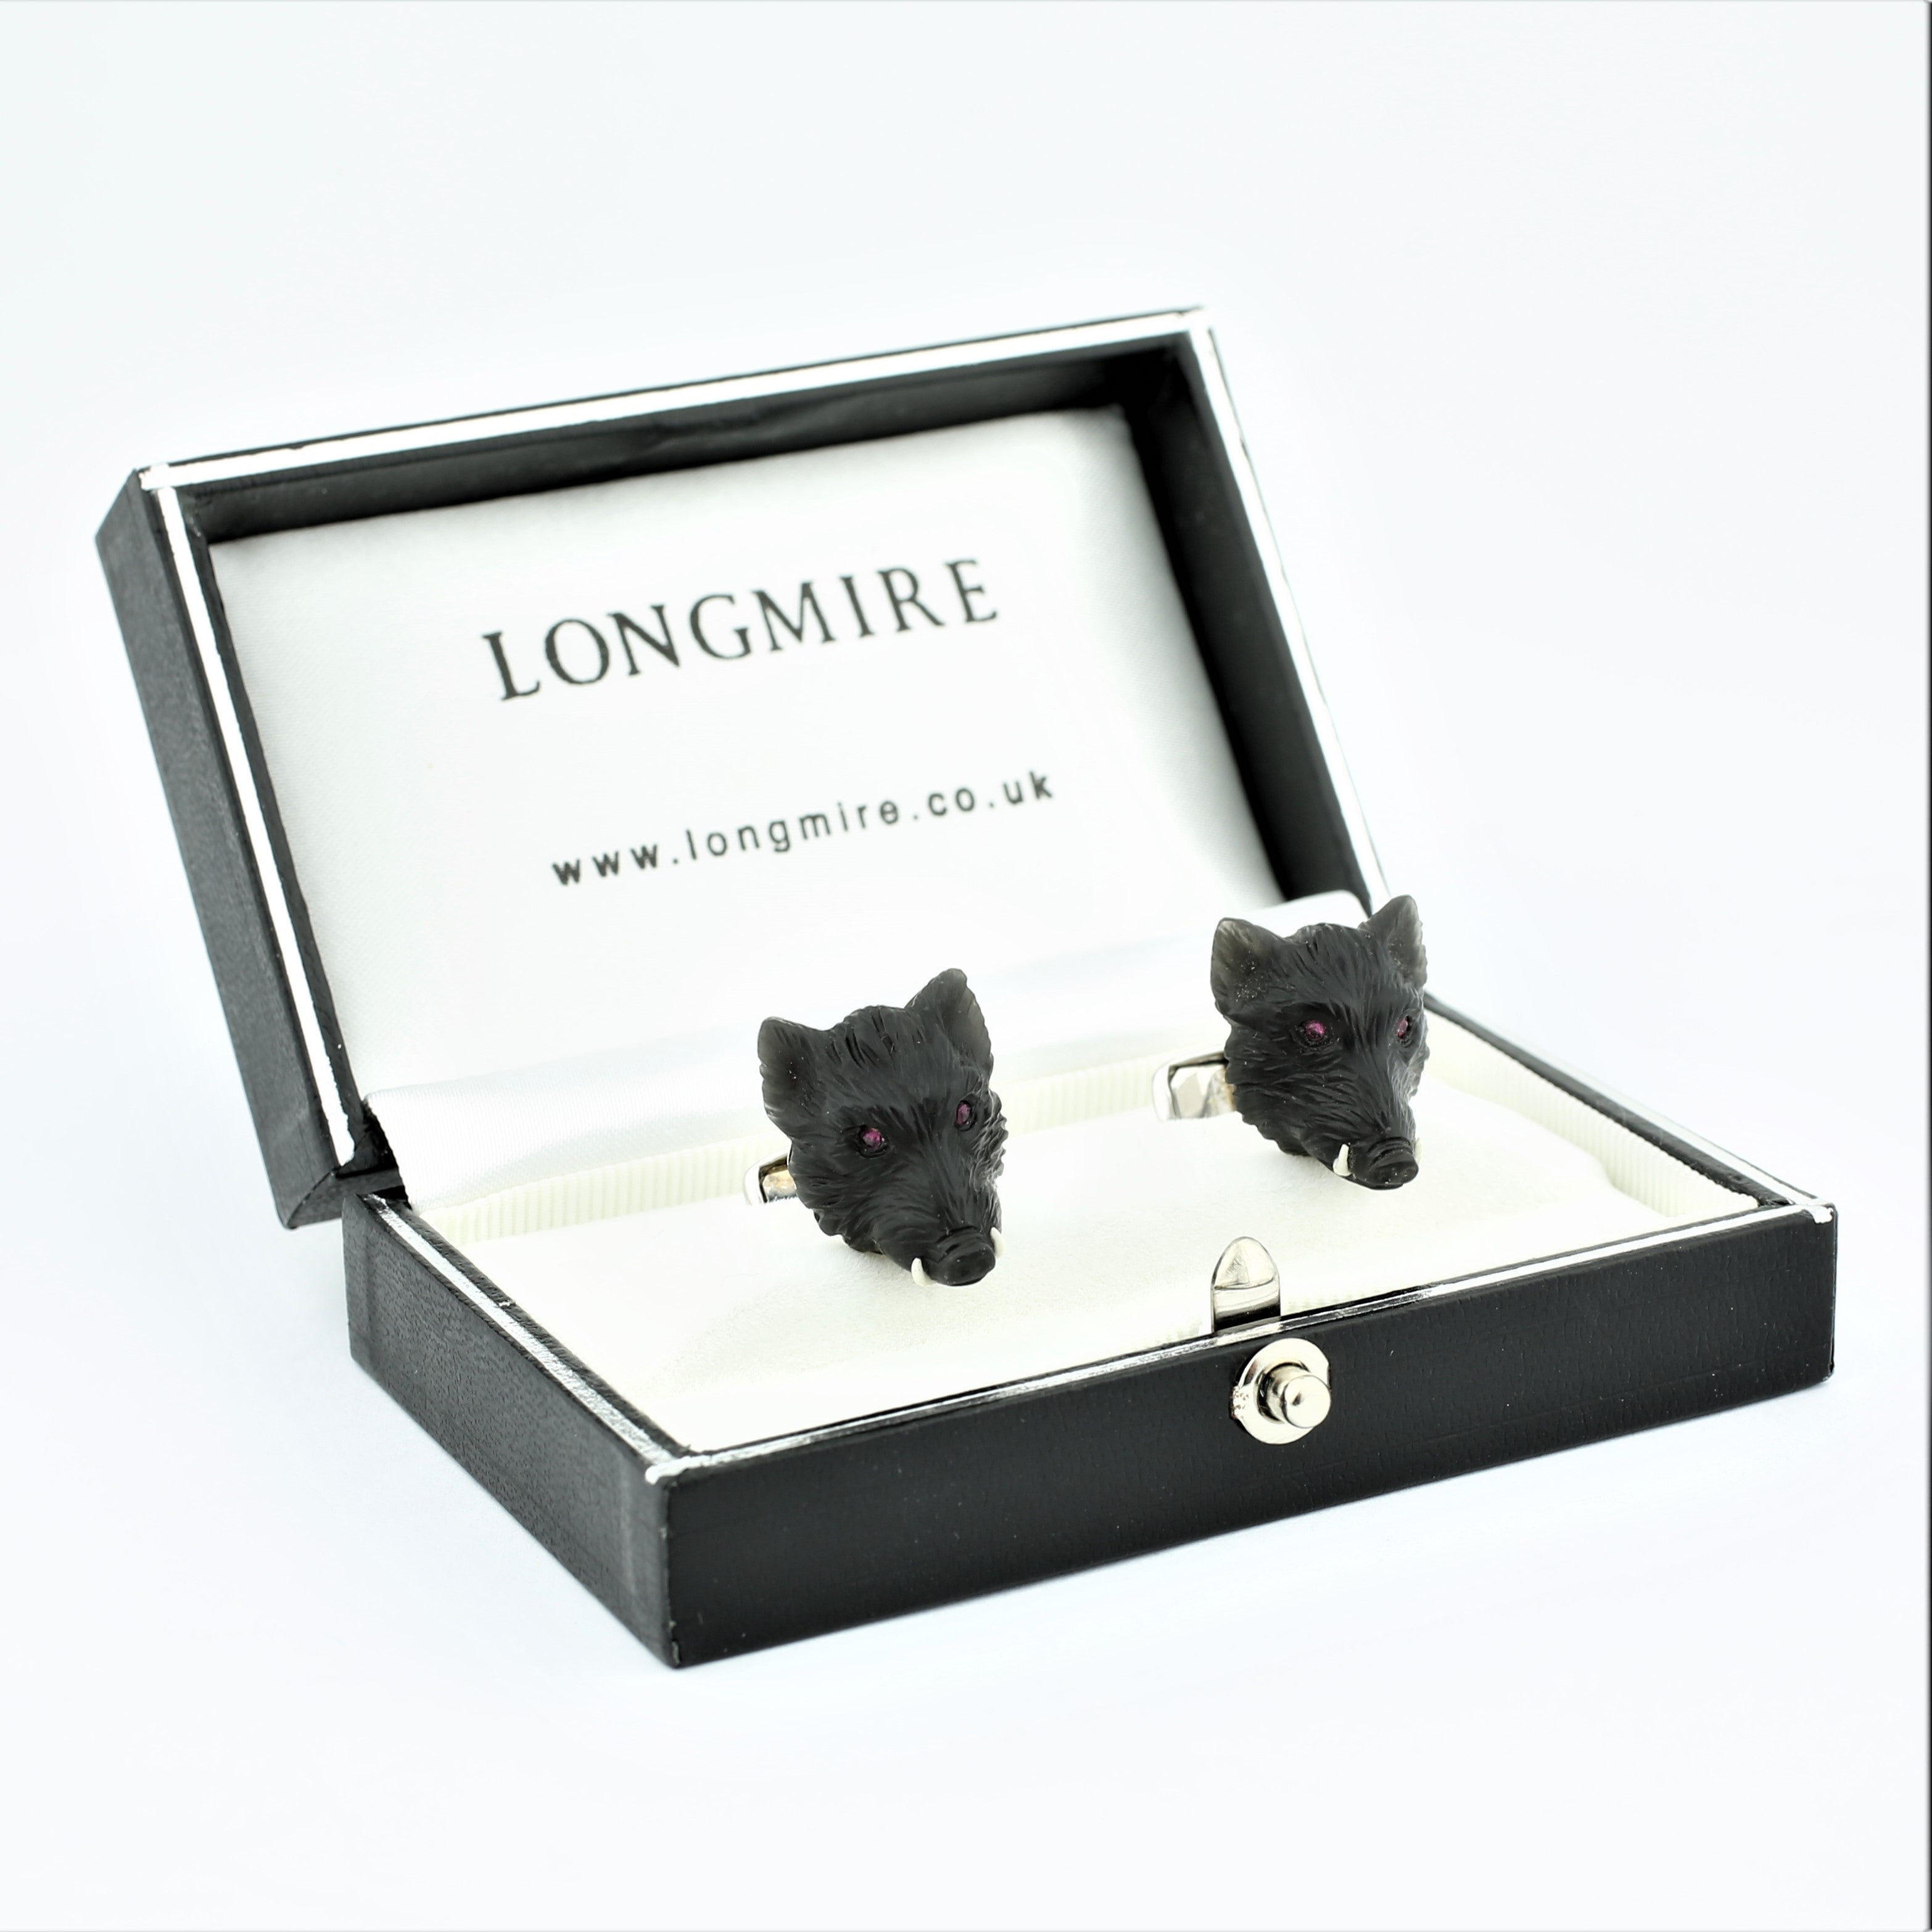 Boar's head cufflinks in obsidian and 18k white gold - boxed